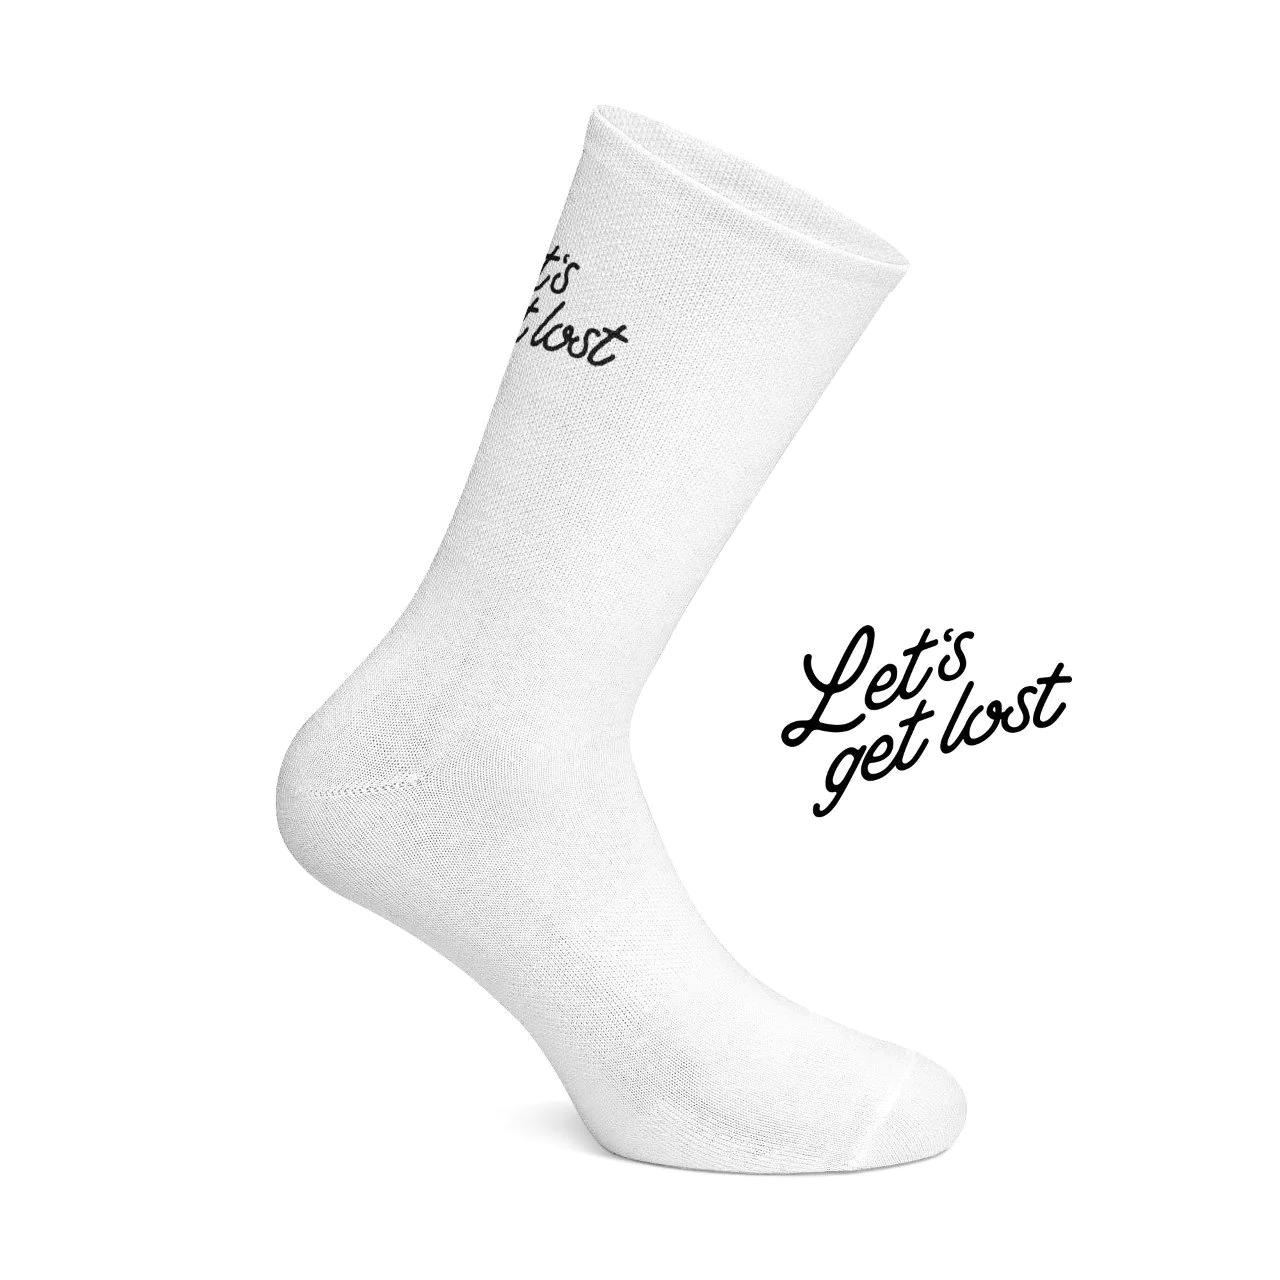 Let's get Lost Cycling Socks - White